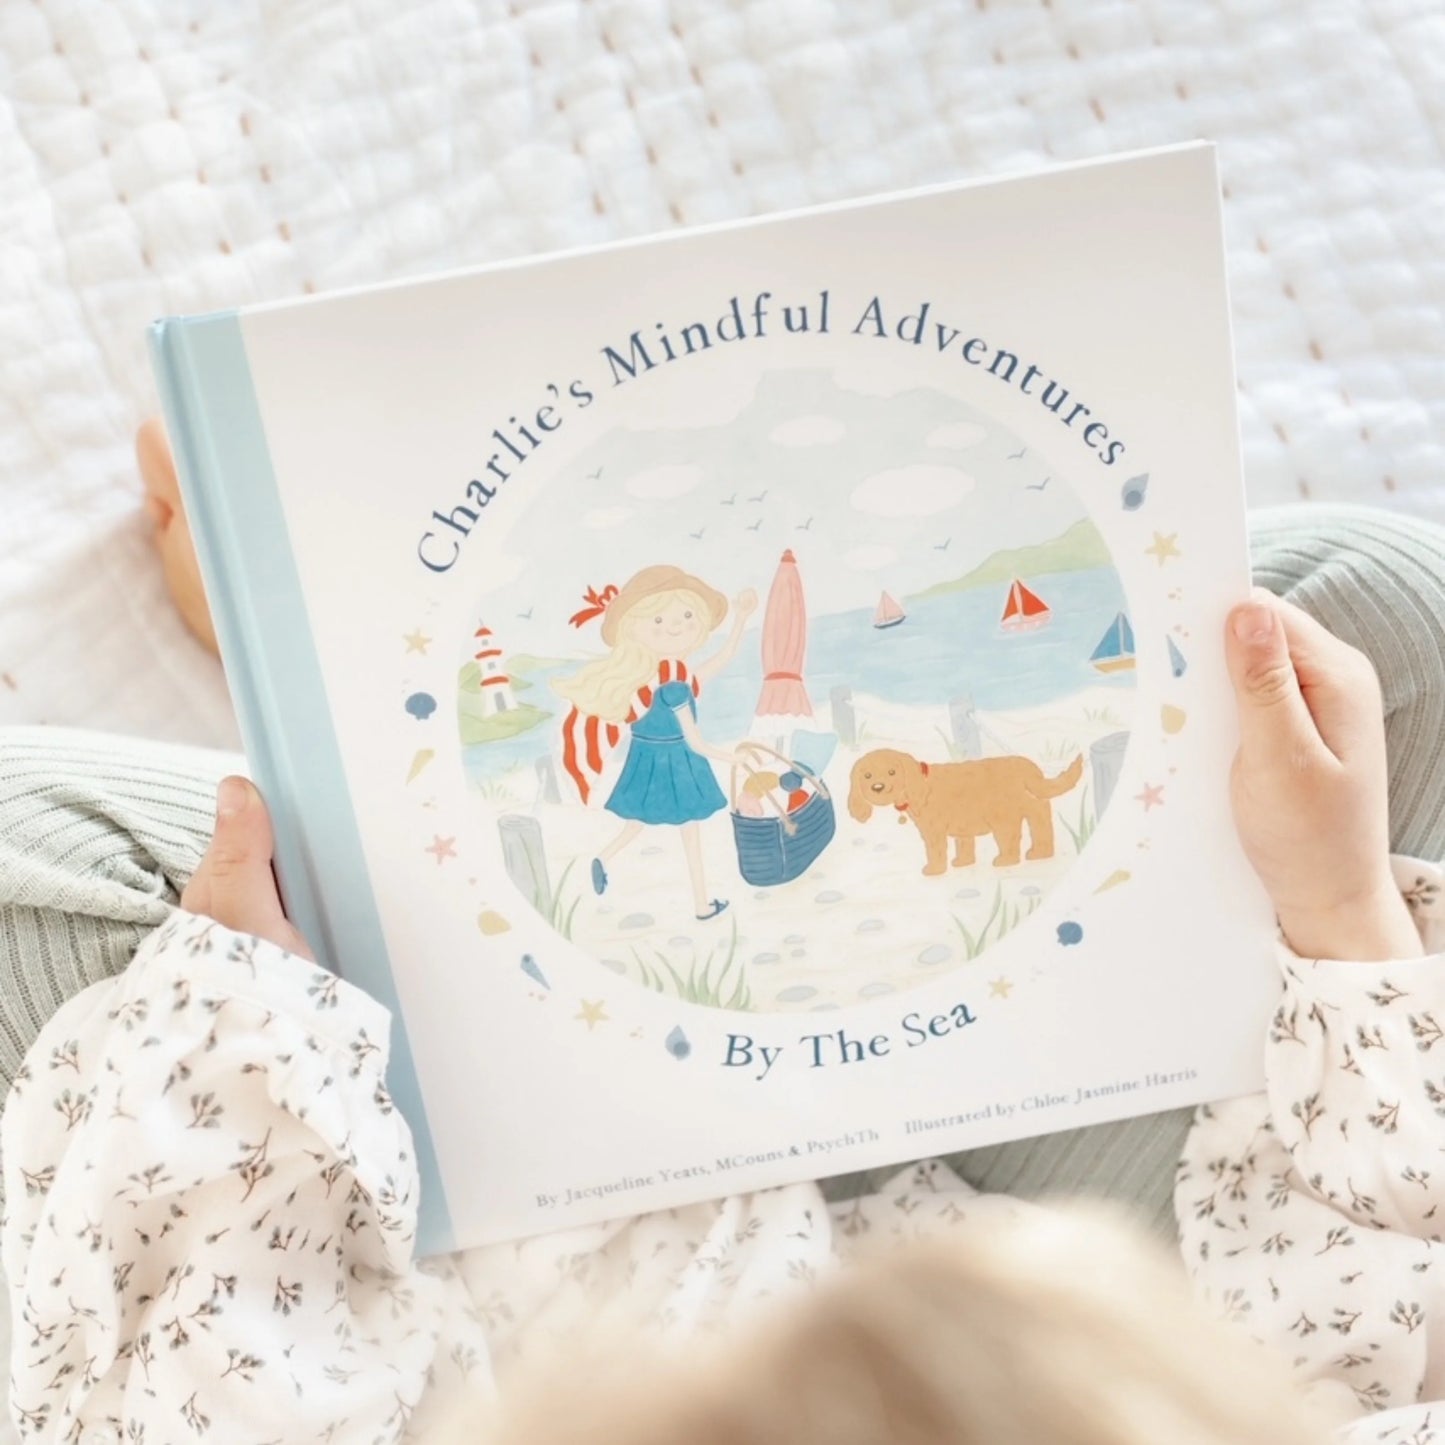 Charlie's Mindful Adventures By the Sea -Mindful & Co